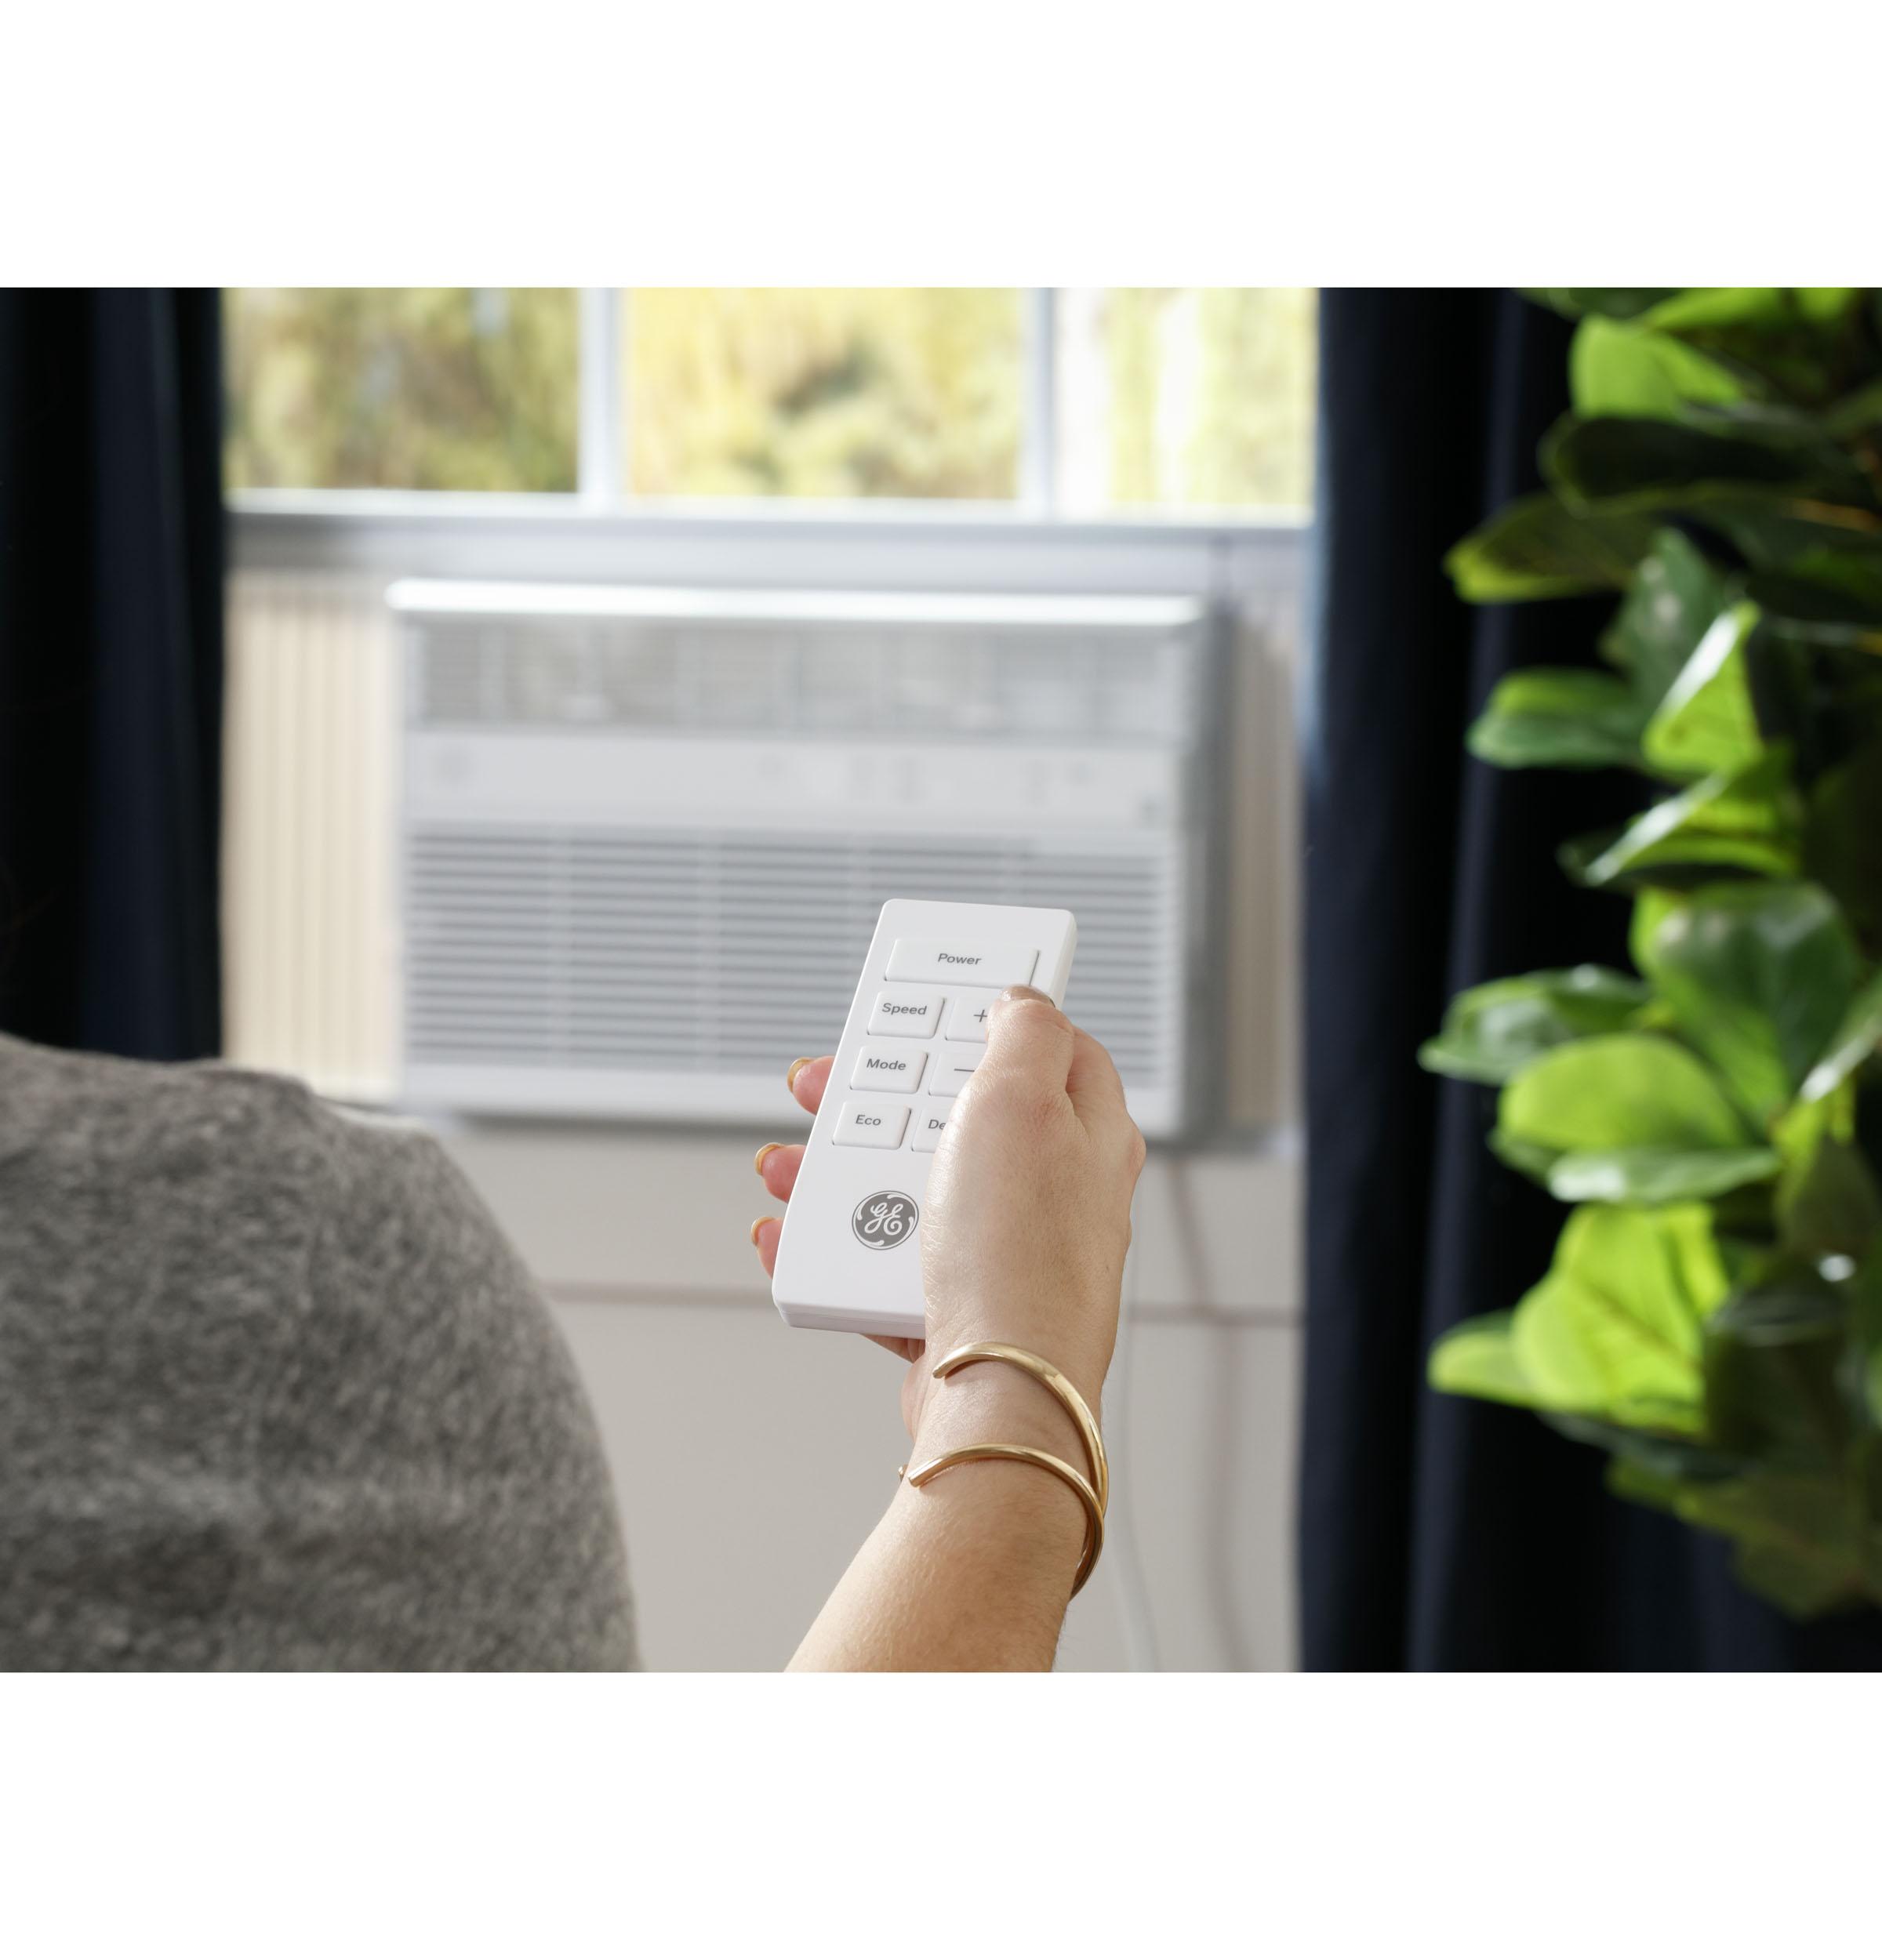 Ge Appliances AHE12DZ Ge® 12,000 Btu Heat/Cool Electronic Window Air Conditioner For Large Rooms Up To 550 Sq. Ft.